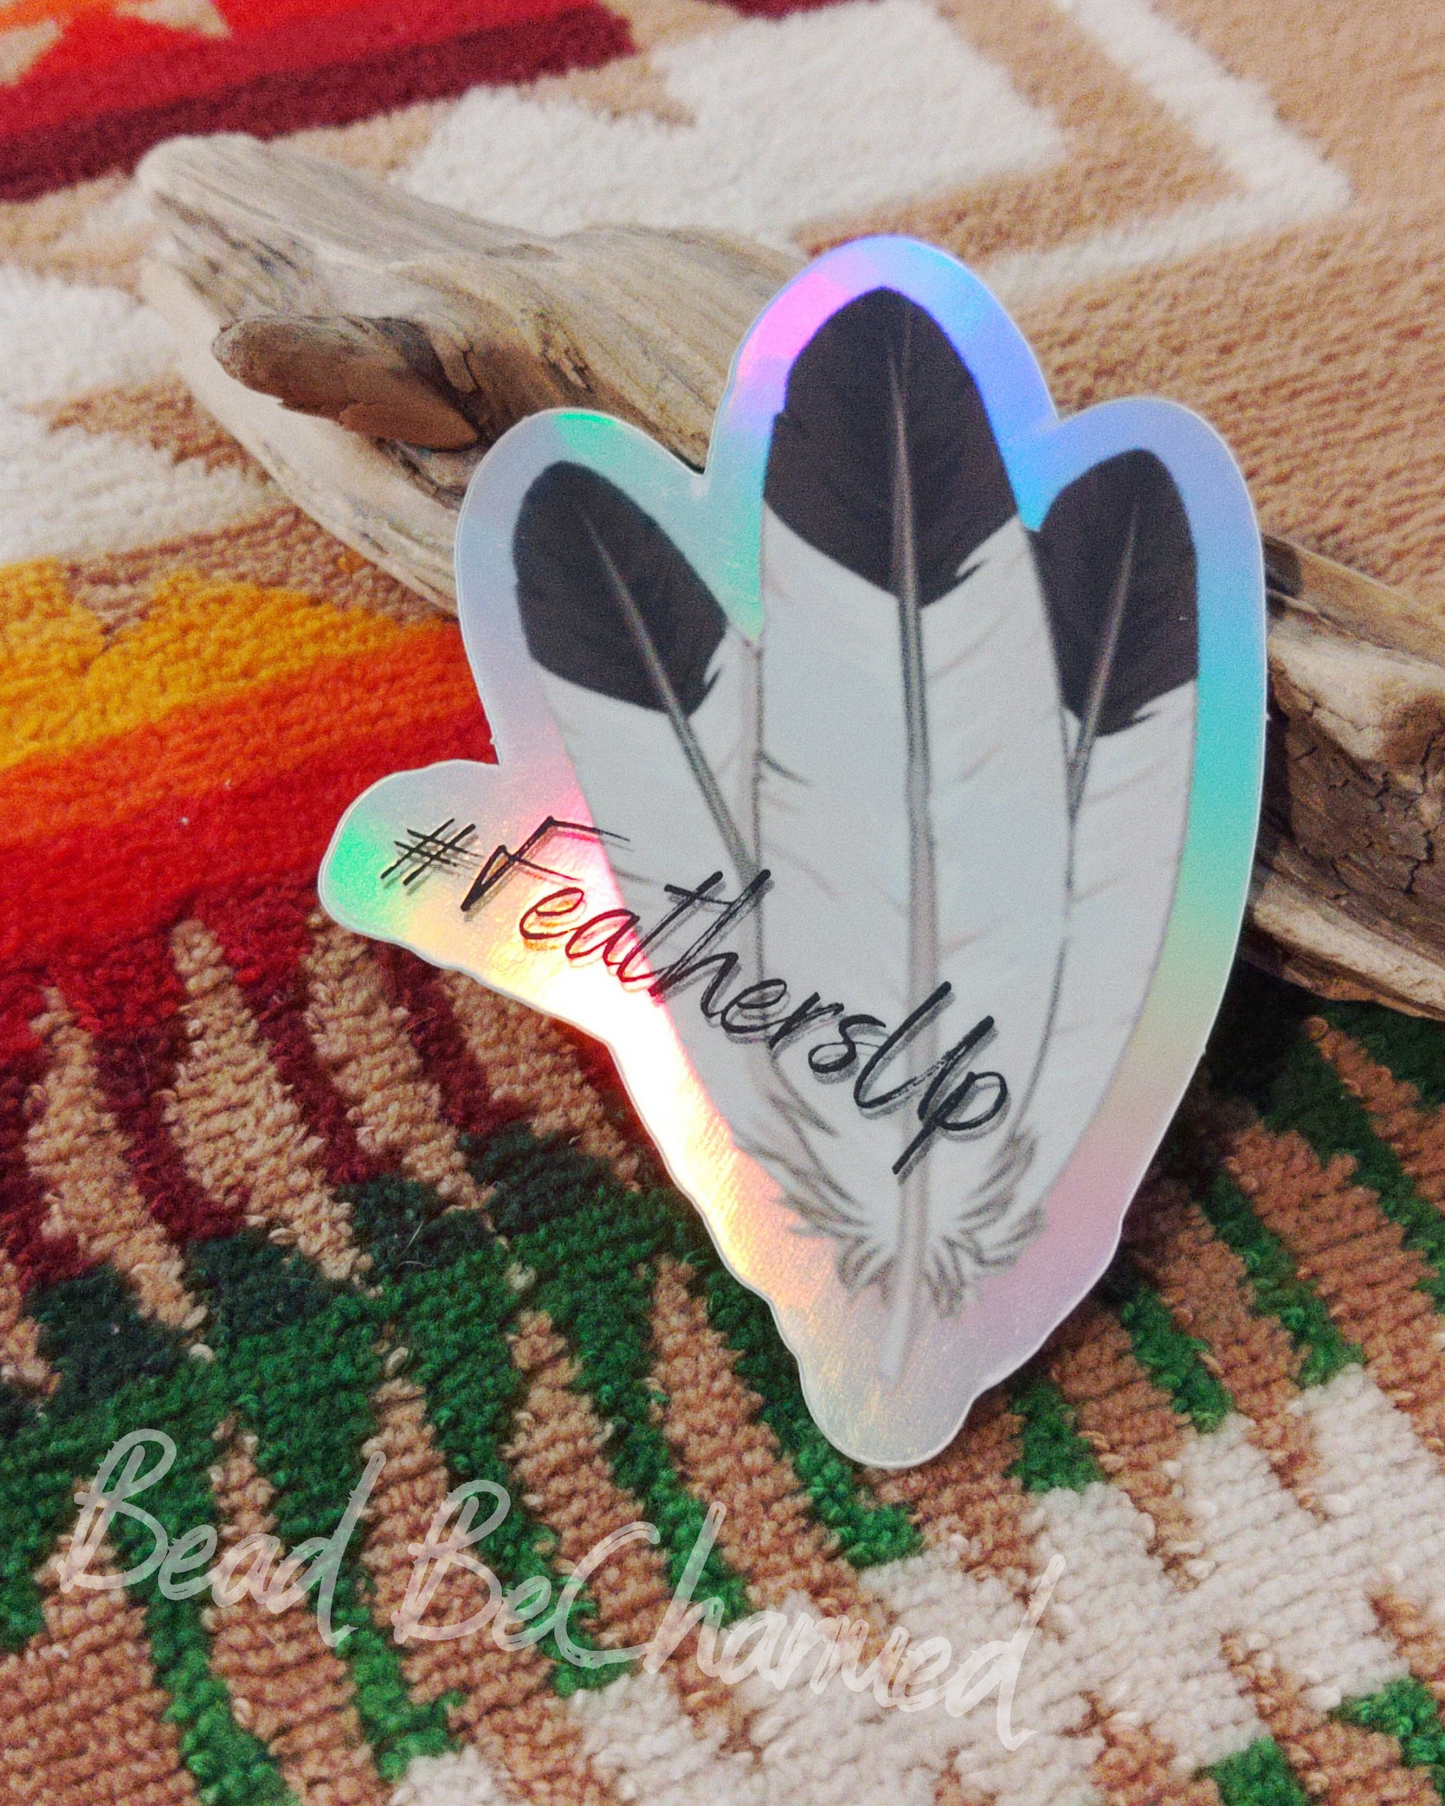 Stickers, '#FeathersUp' - Kiss-Cut Vinyl Holographic Stickers, Indigenous Awareness Decal